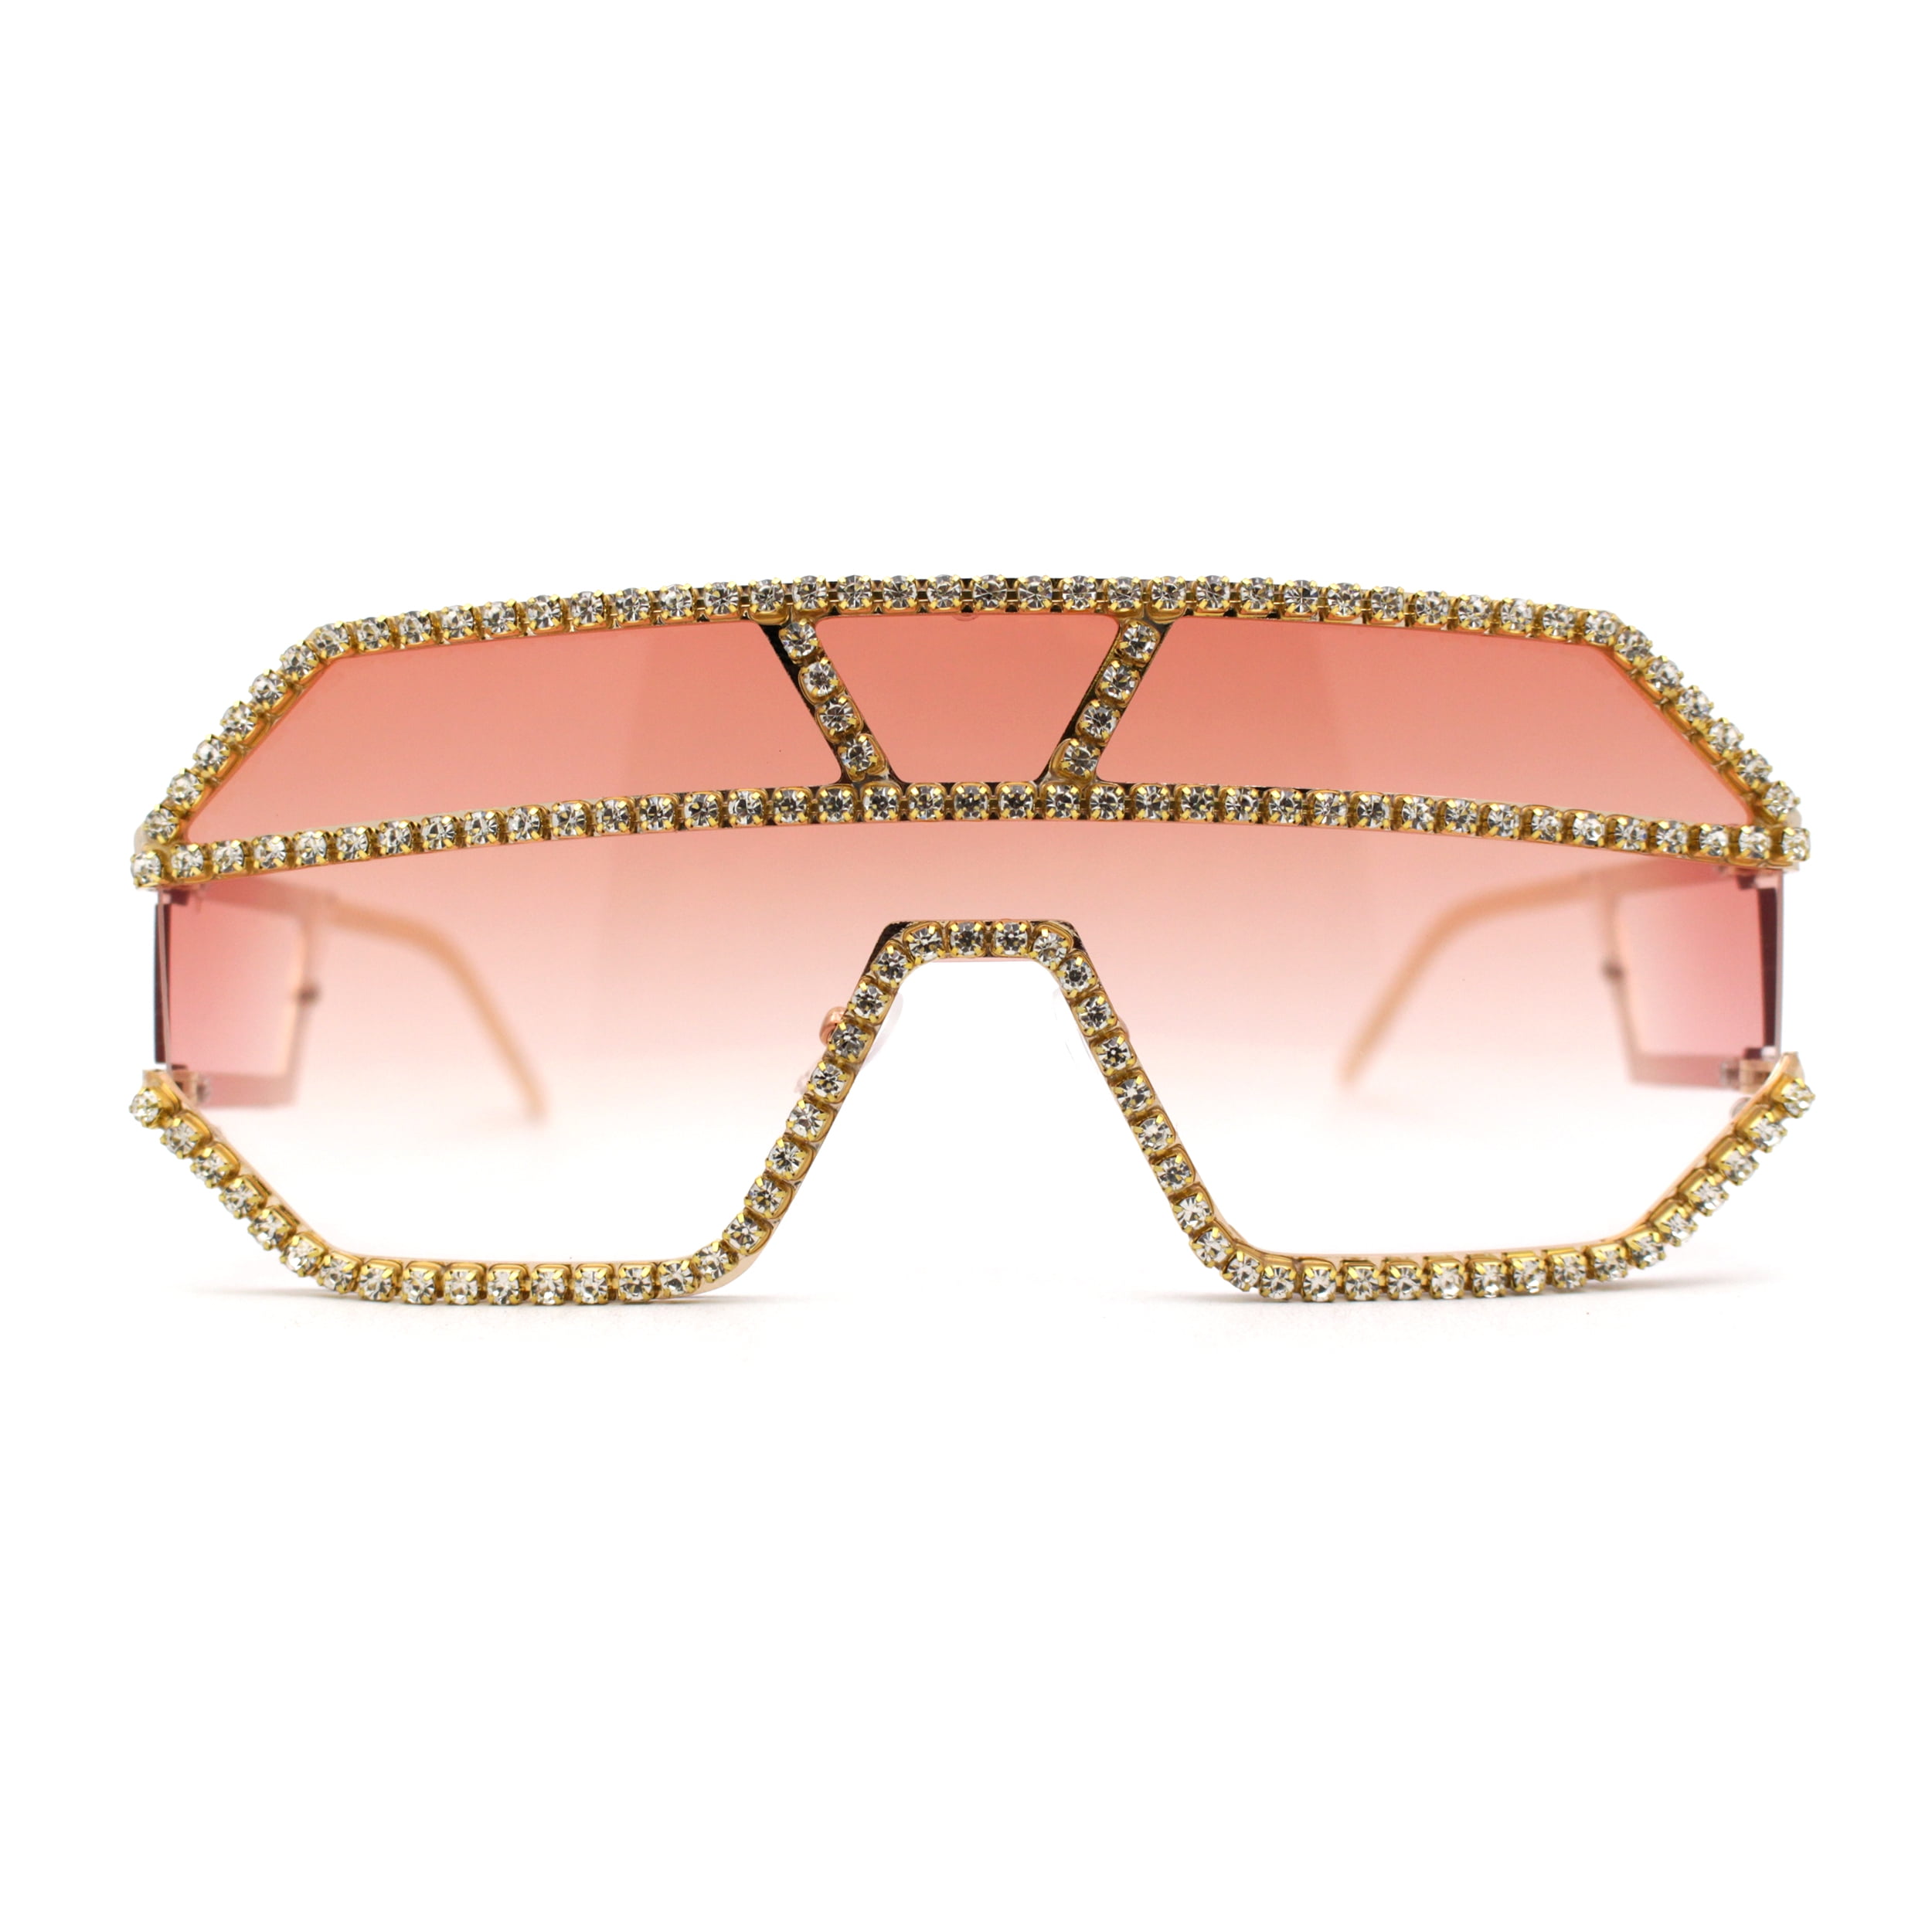 Gucci | Accessories | Authentic Gucci Hollywood Forever Pink Crystals  Sunglasses | Poshmark